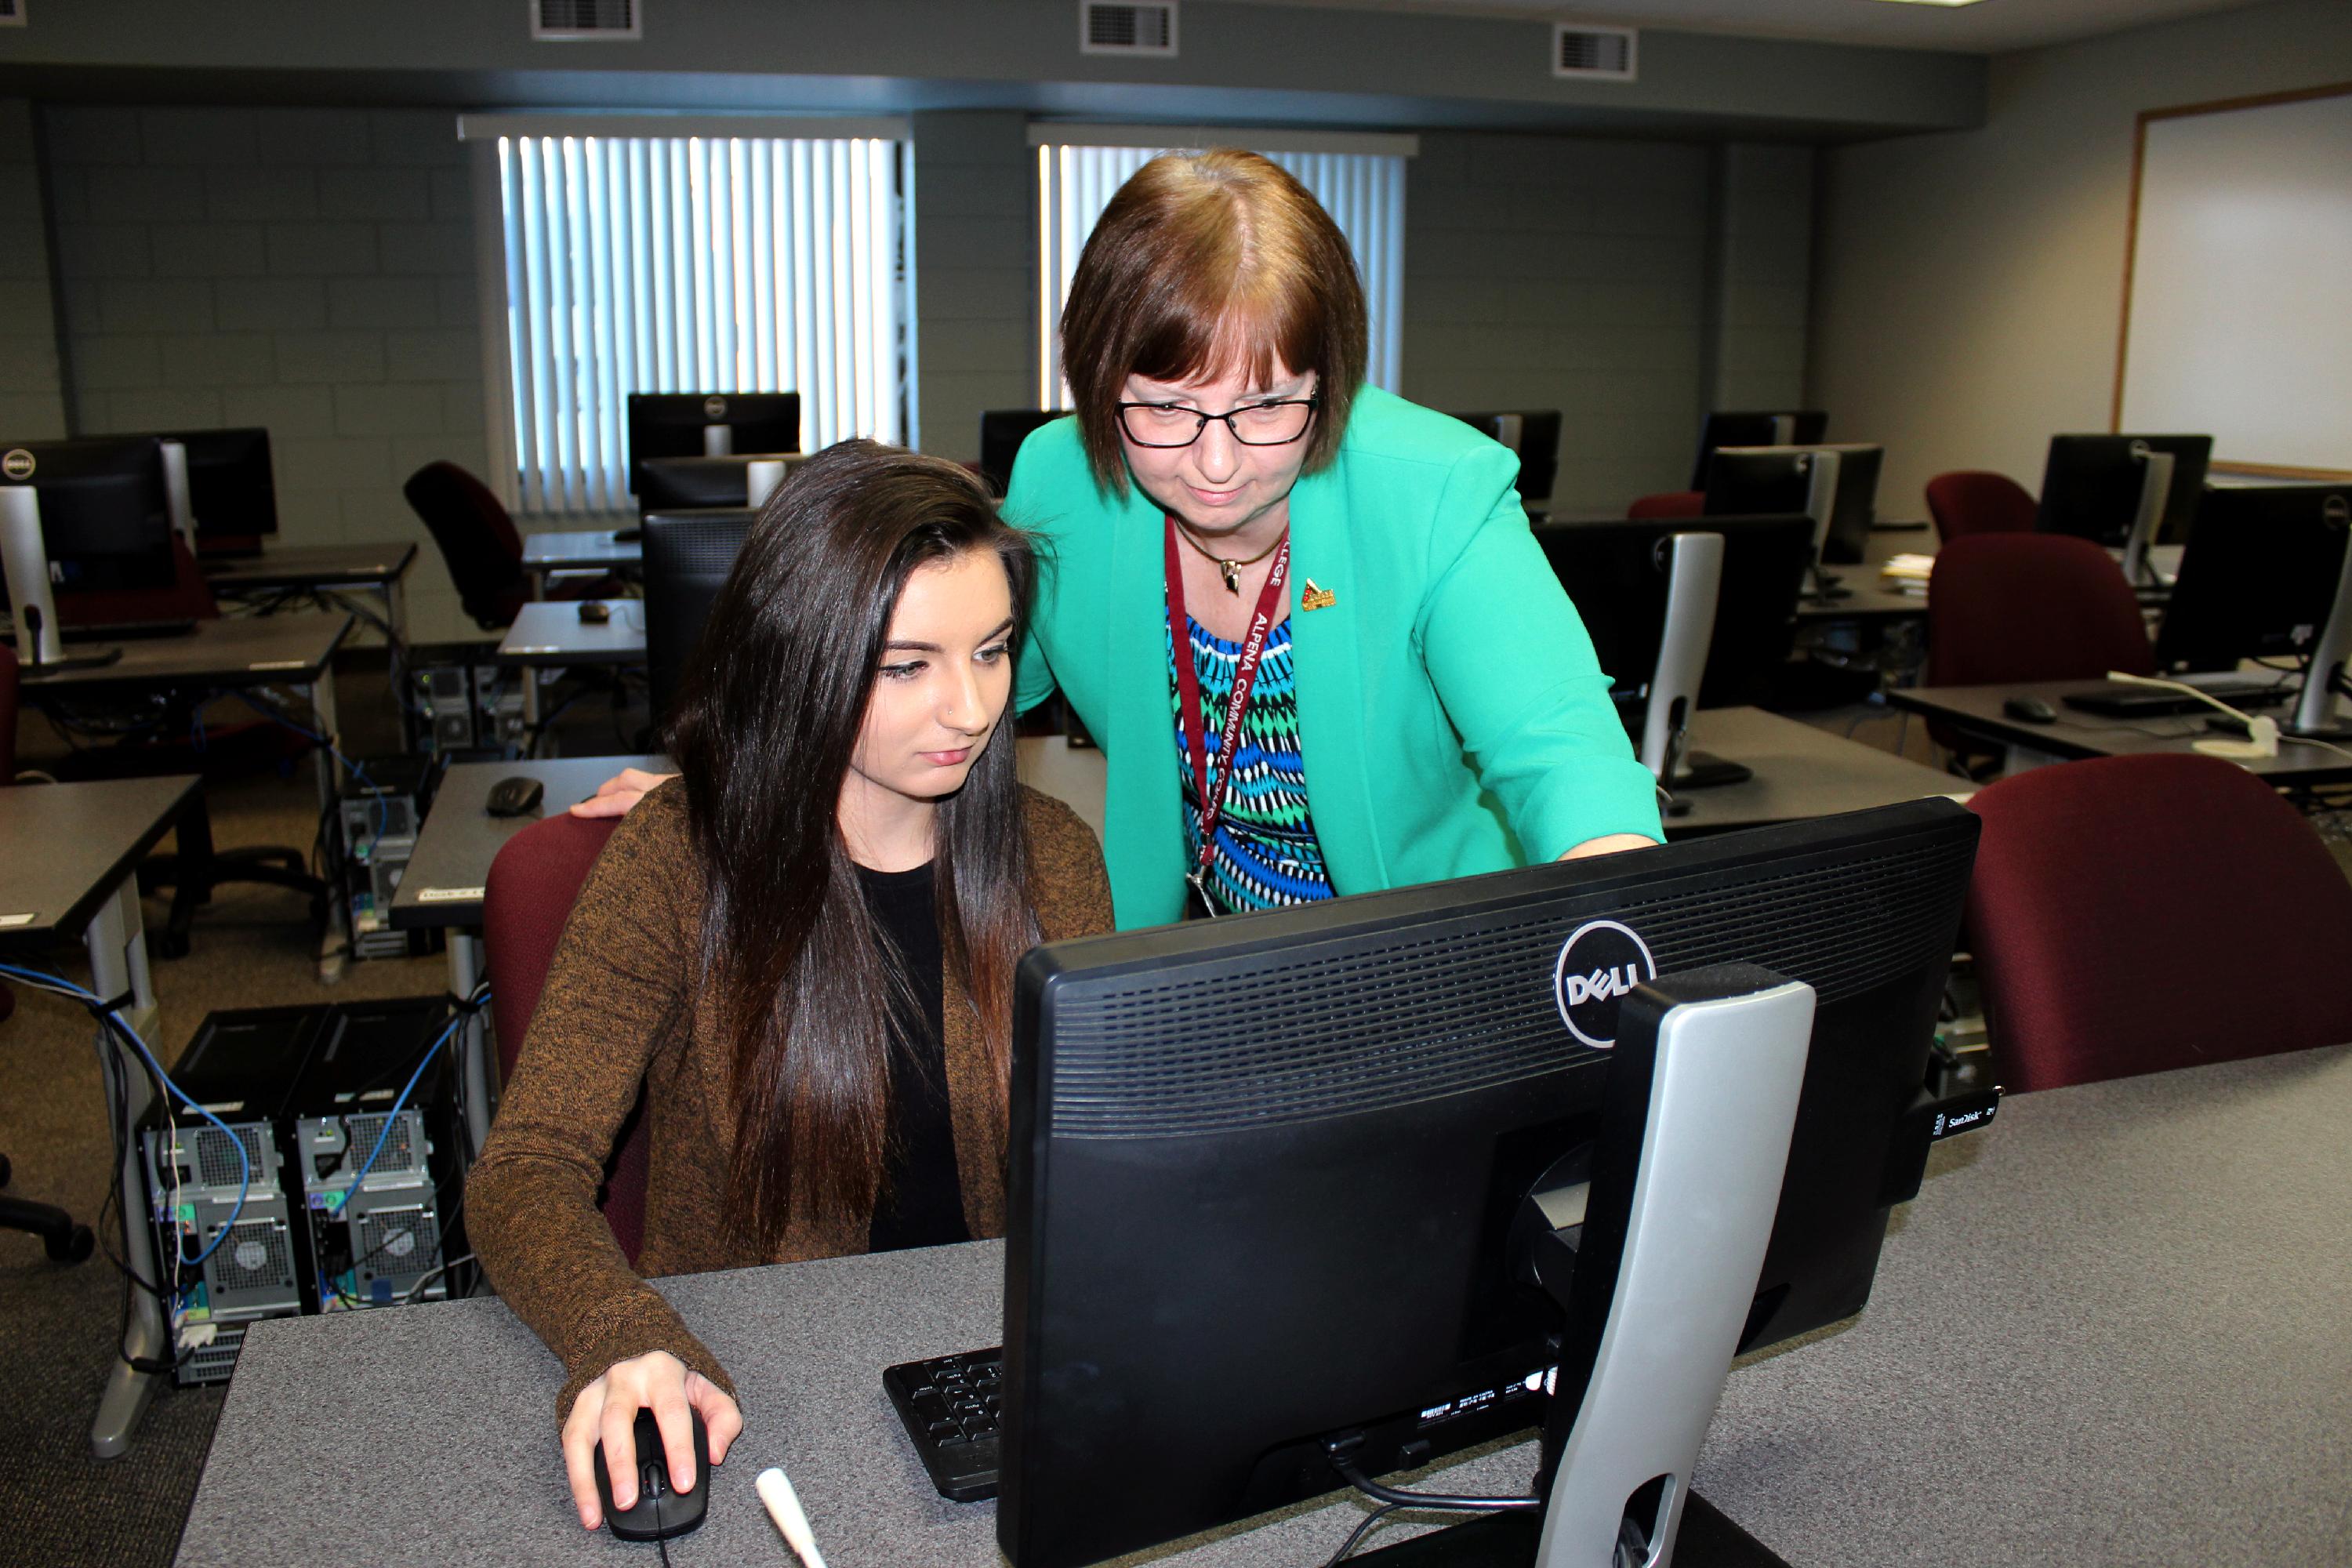 Instructor and student on computer